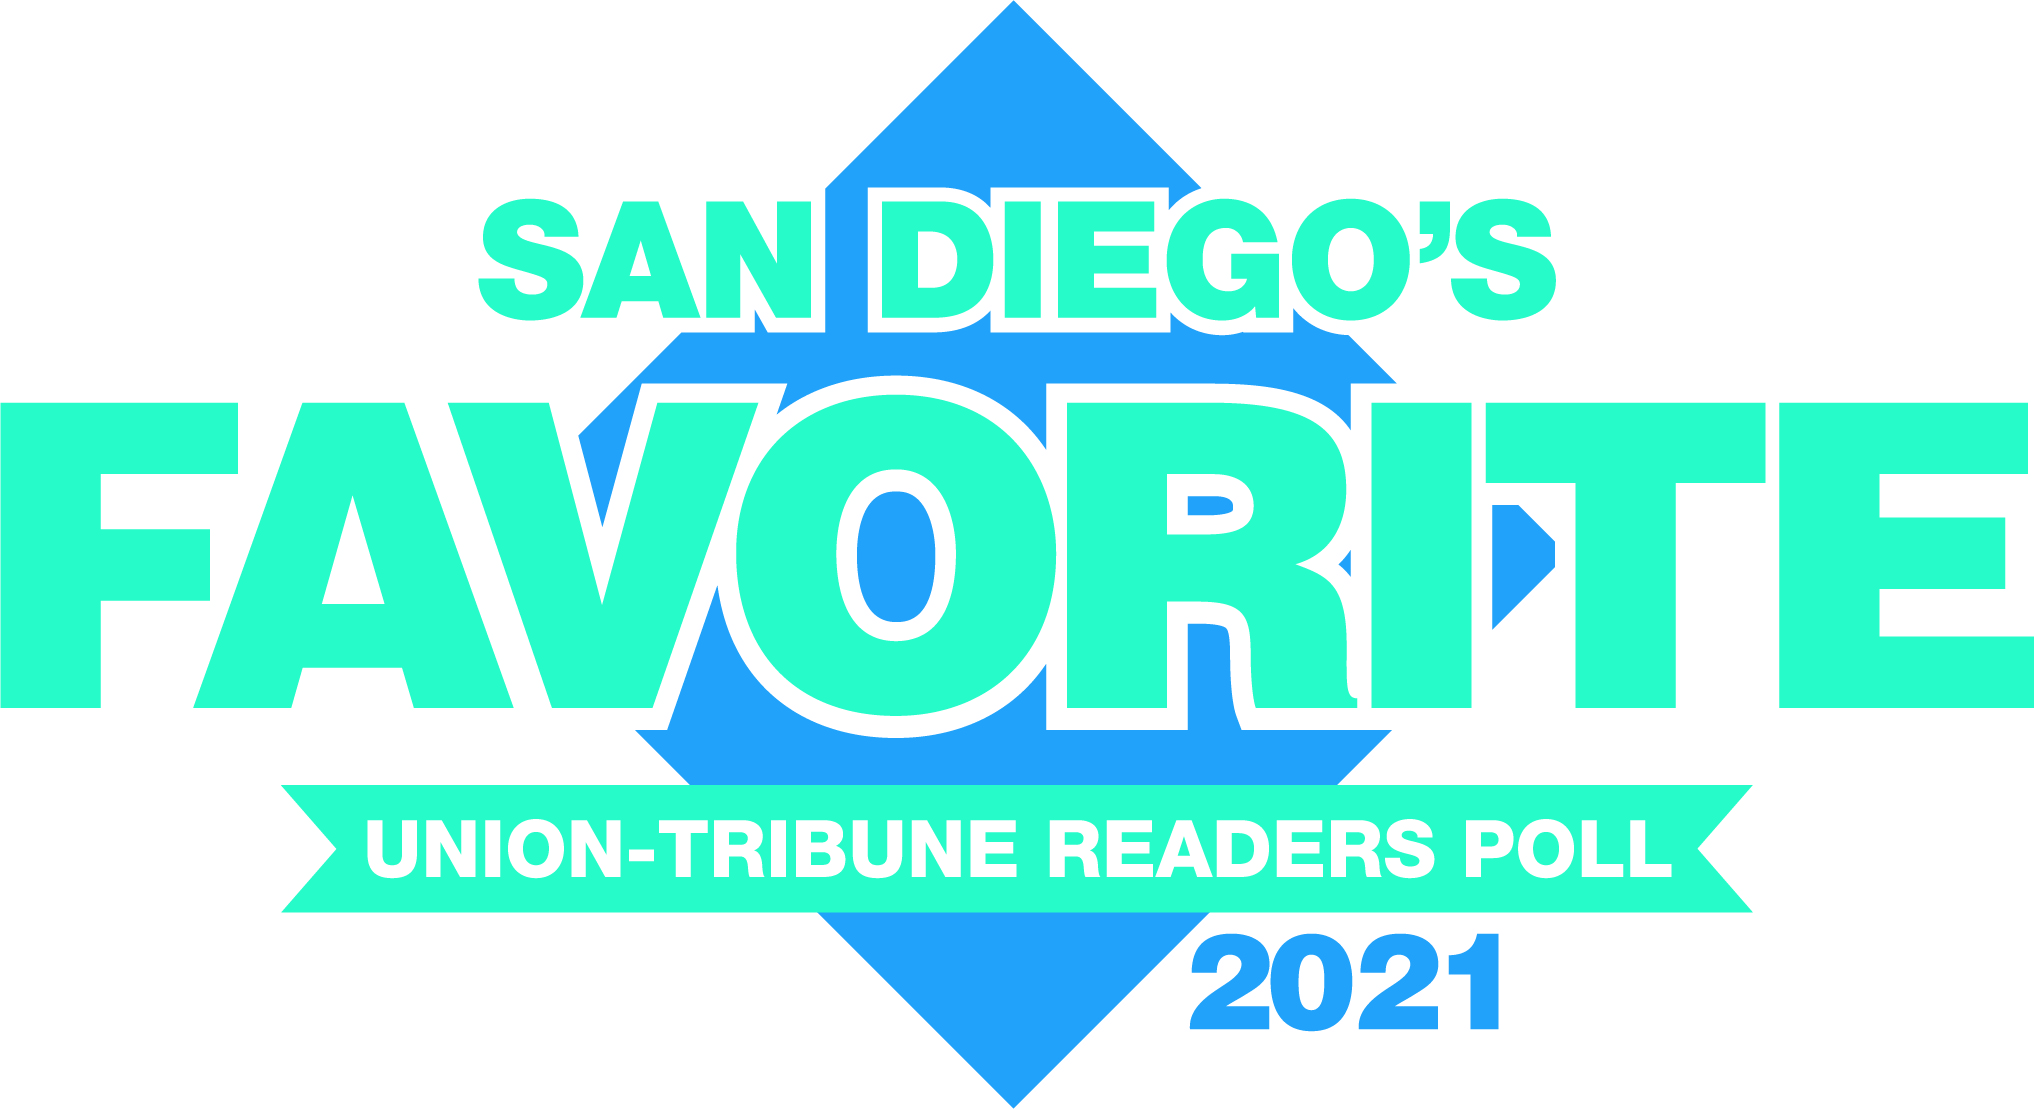 2021 San Diego Union Tribune readers poll favorite logo for best heating and air company